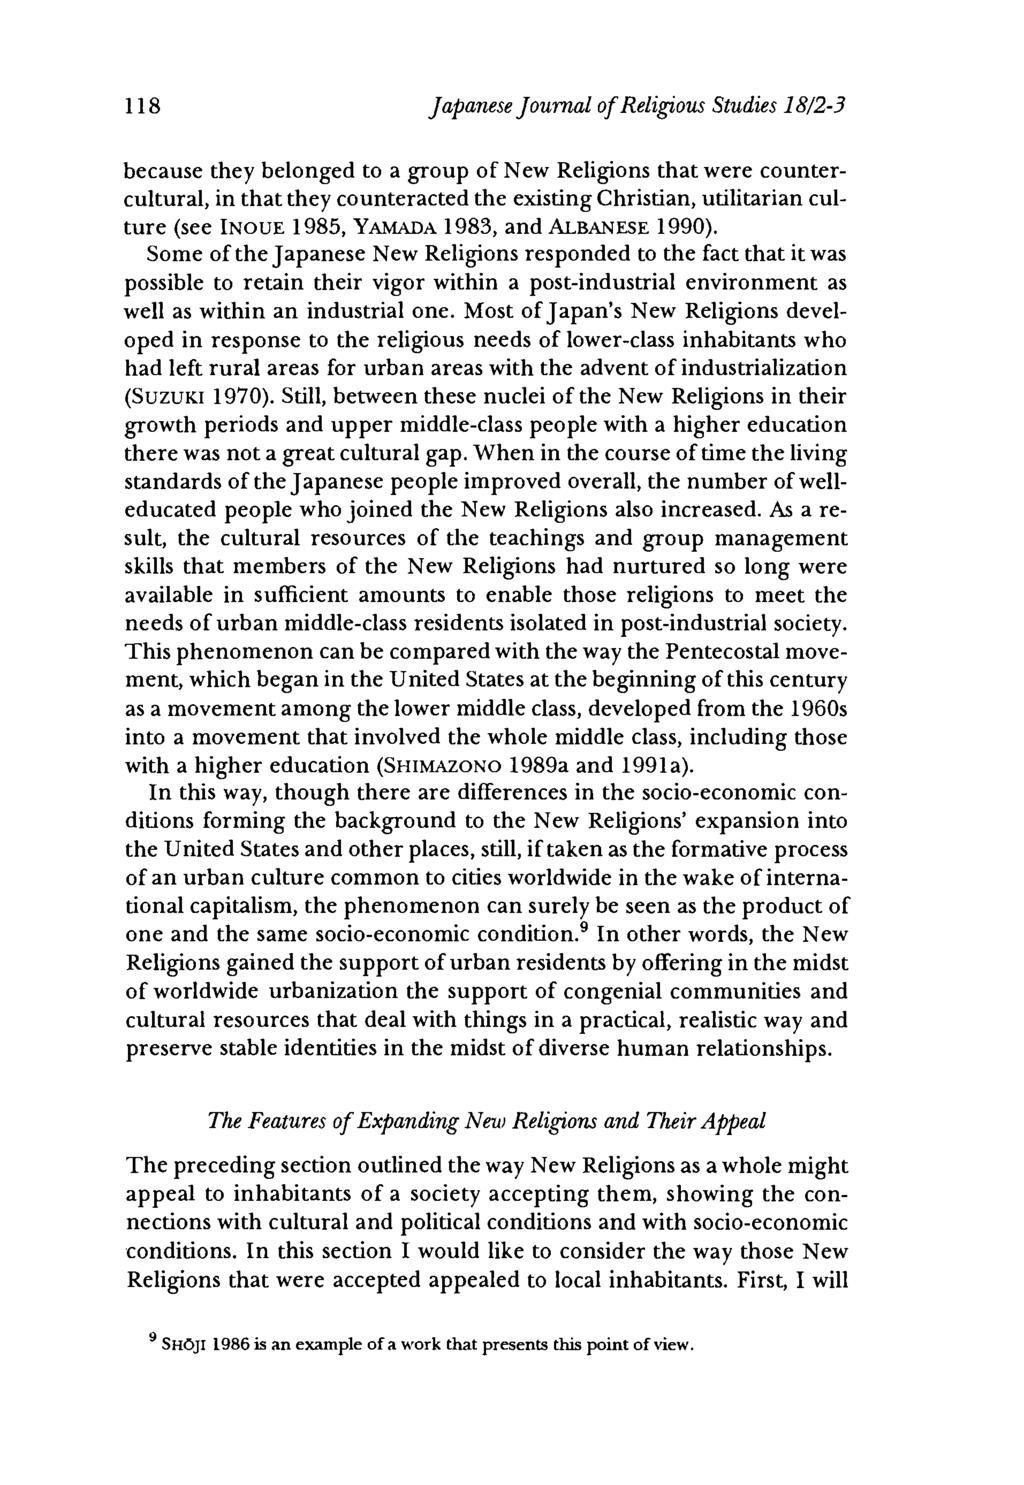 118 Japanese Journal of Religious Studies 18/2-3 because they belonged to a group of New Religions that were countercultural, in that they counteracted the existing Christian, utilitarian culture